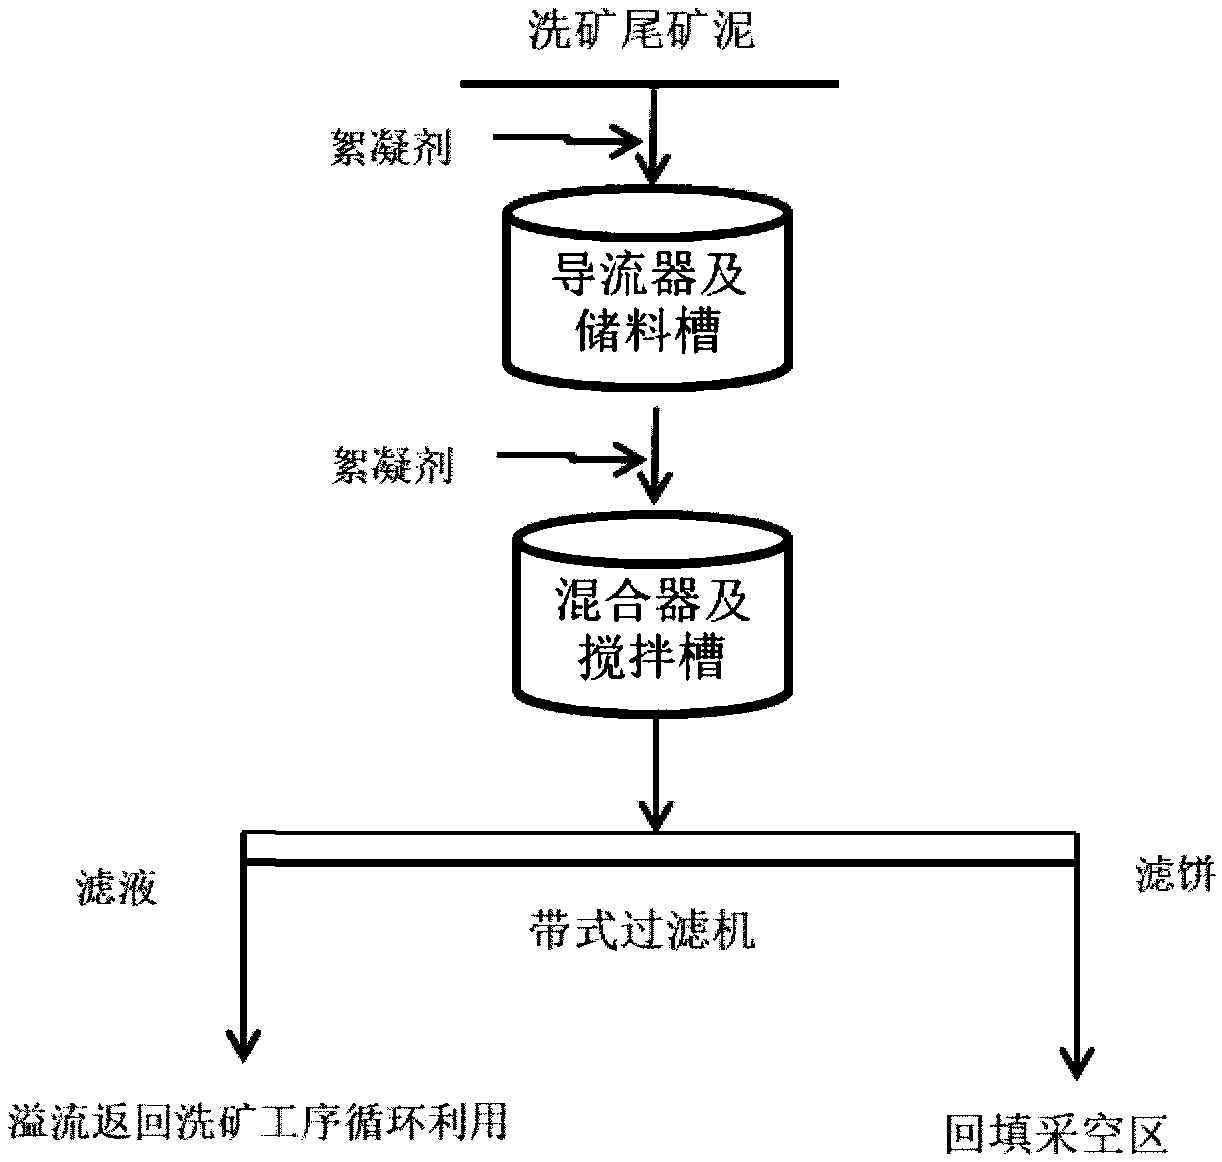 Method for dewatering washing tailing slime of bauxite ore